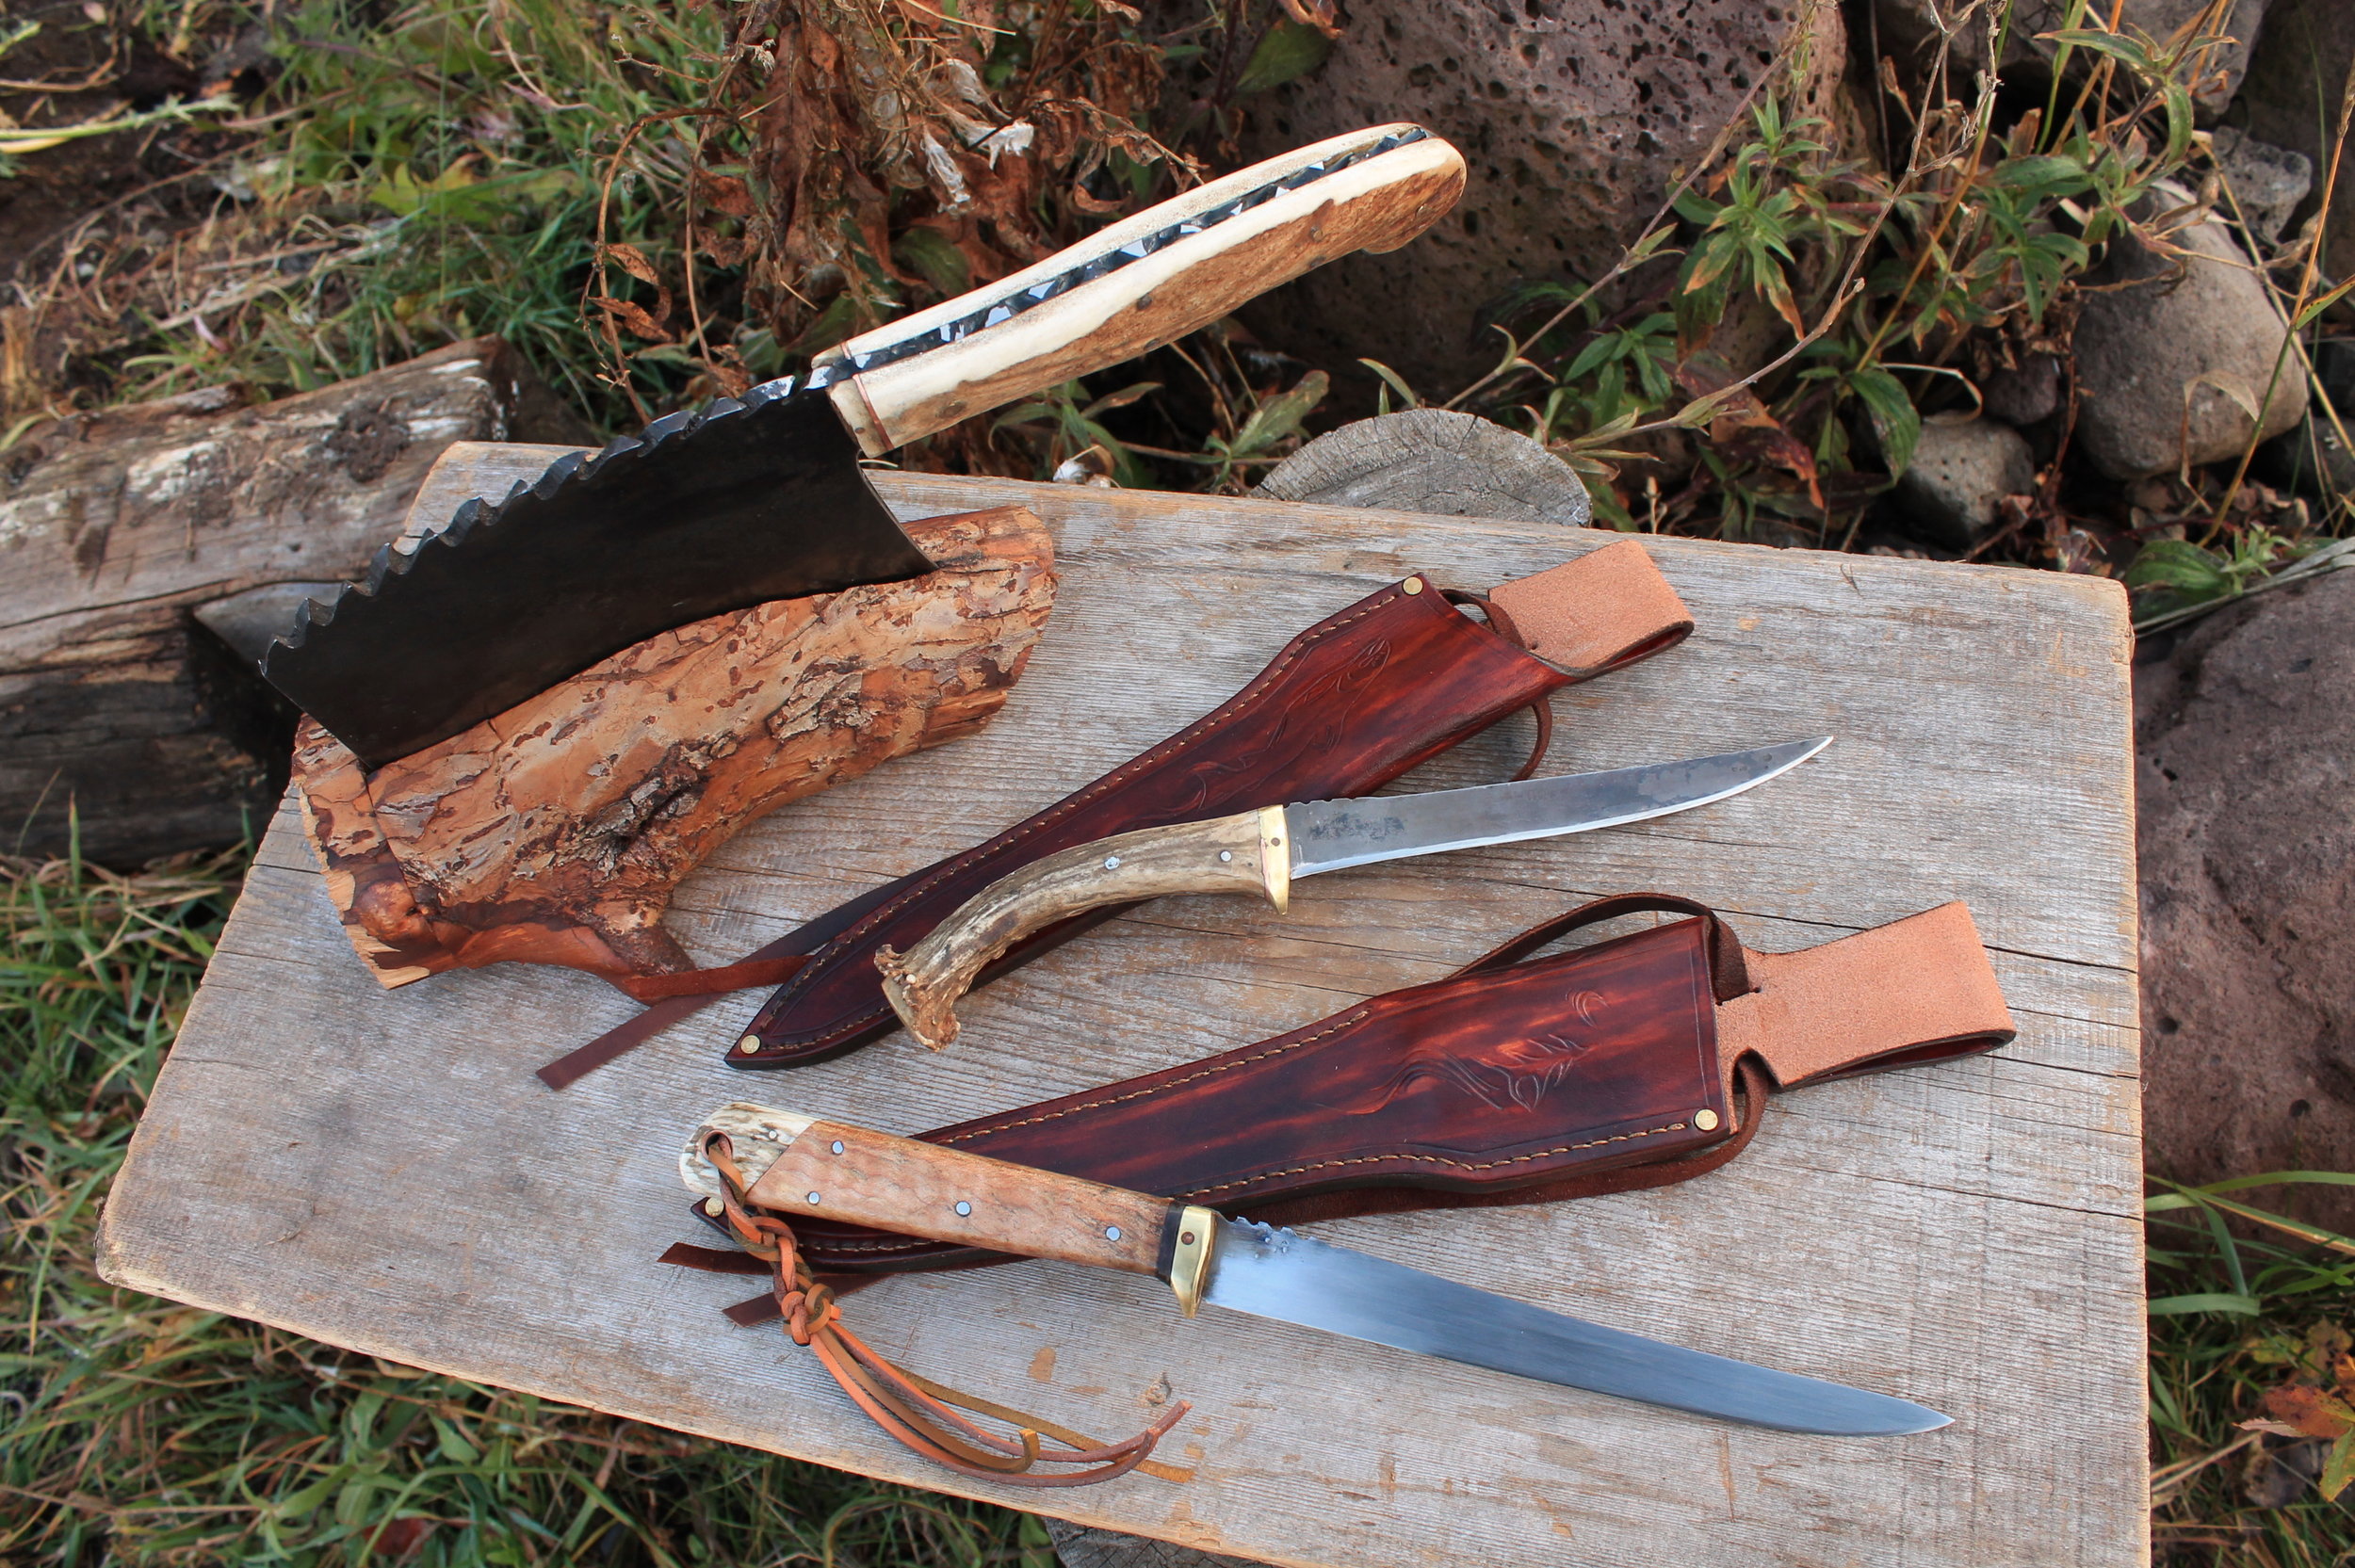 Handmade Fish Cleaver and Fillet Knives